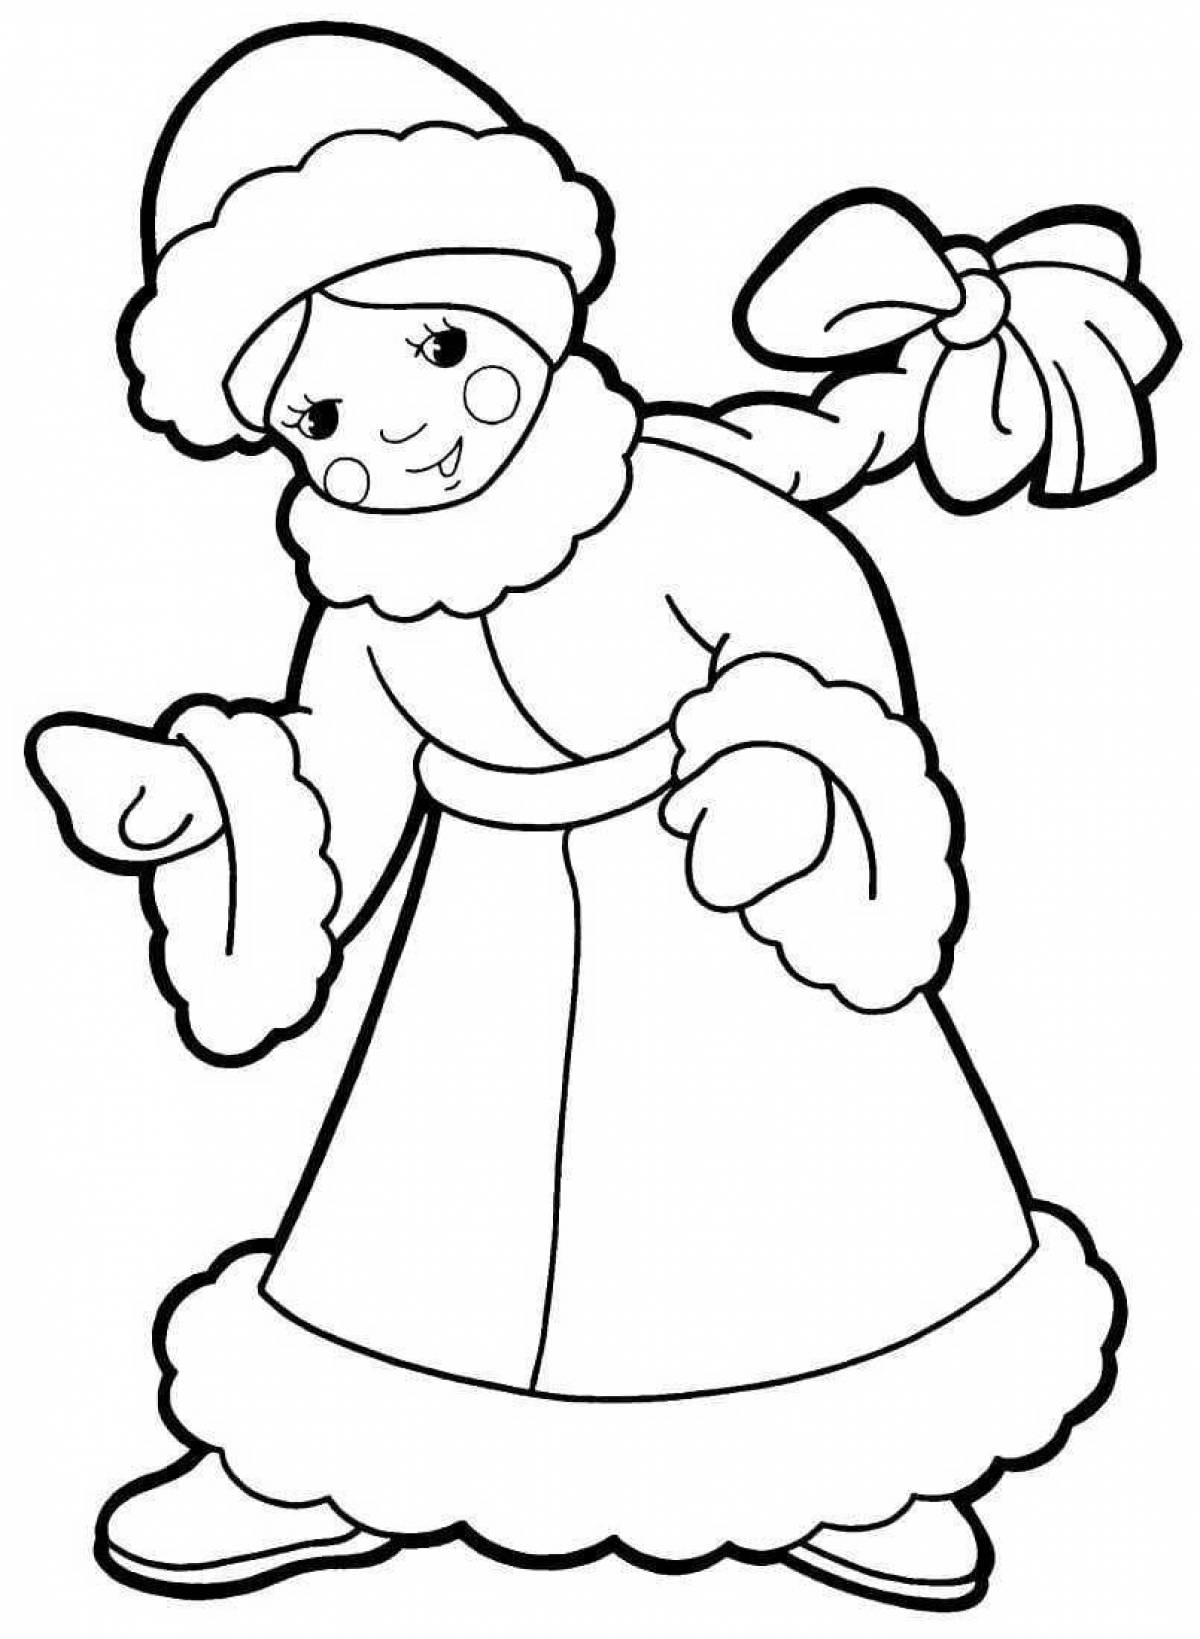 Coloring page glamorous New Year's snow maiden